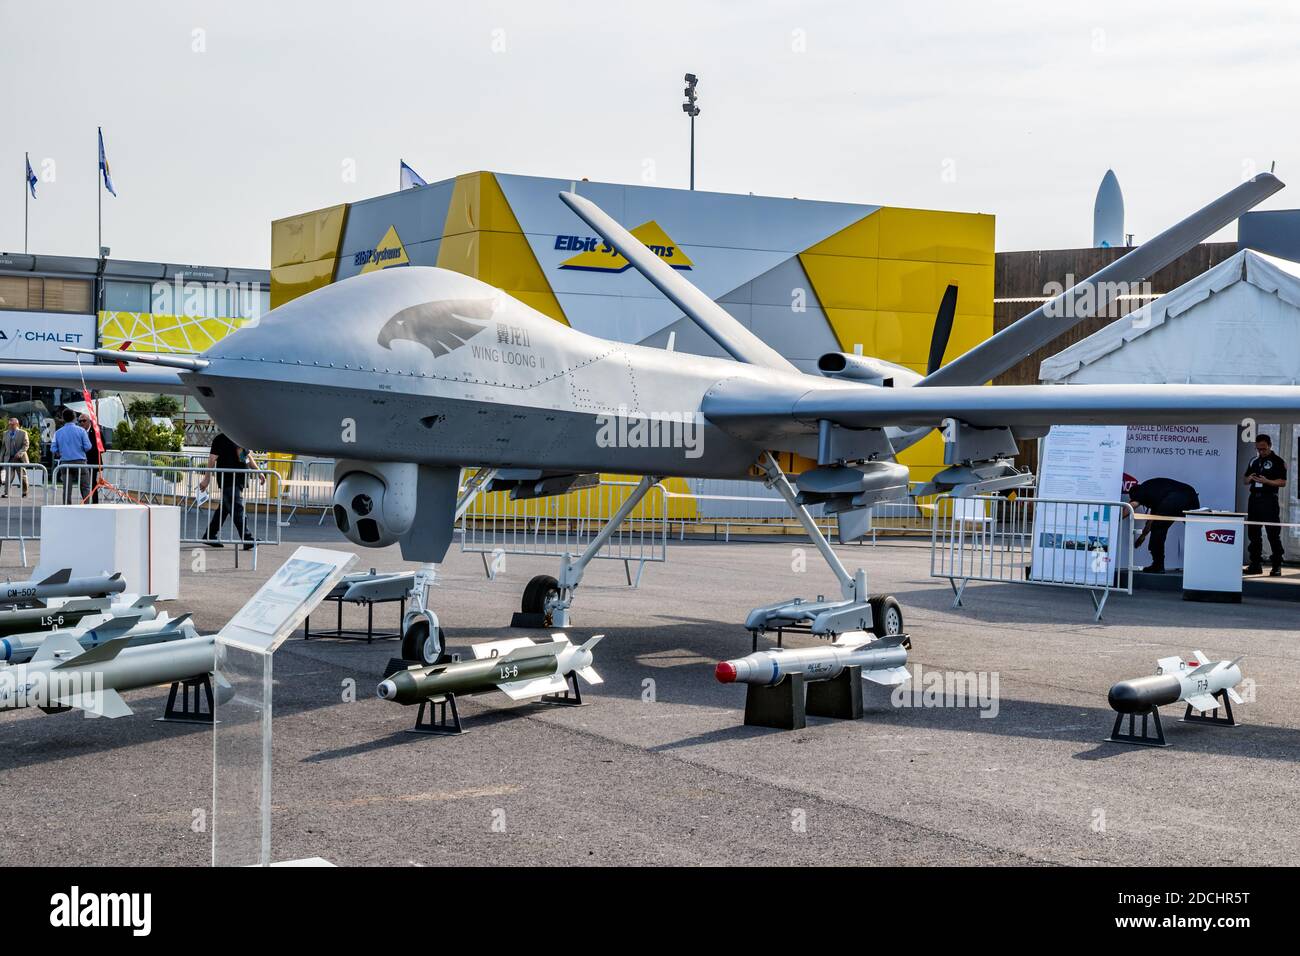 Chinese Chengdu Aircraft Industry Group (CAIG) Wing Loong II  military UAV drone showcased at the Paris Air Show. France - Jun 22, 2017 Stock Photo